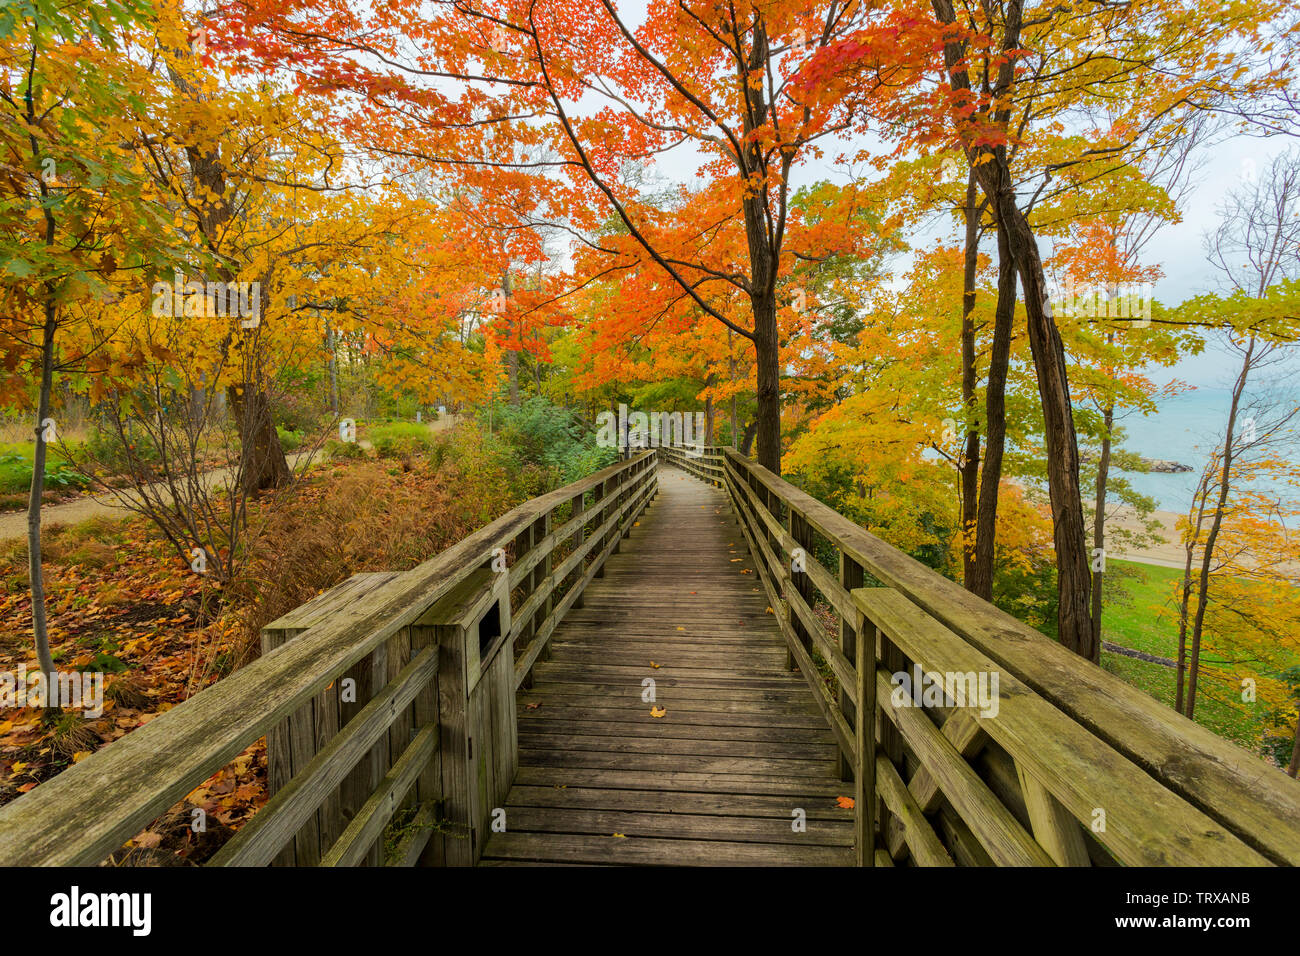 Fall Autumn Scene with colorful leaves on a stairway leading up to a bridge Stock Photo